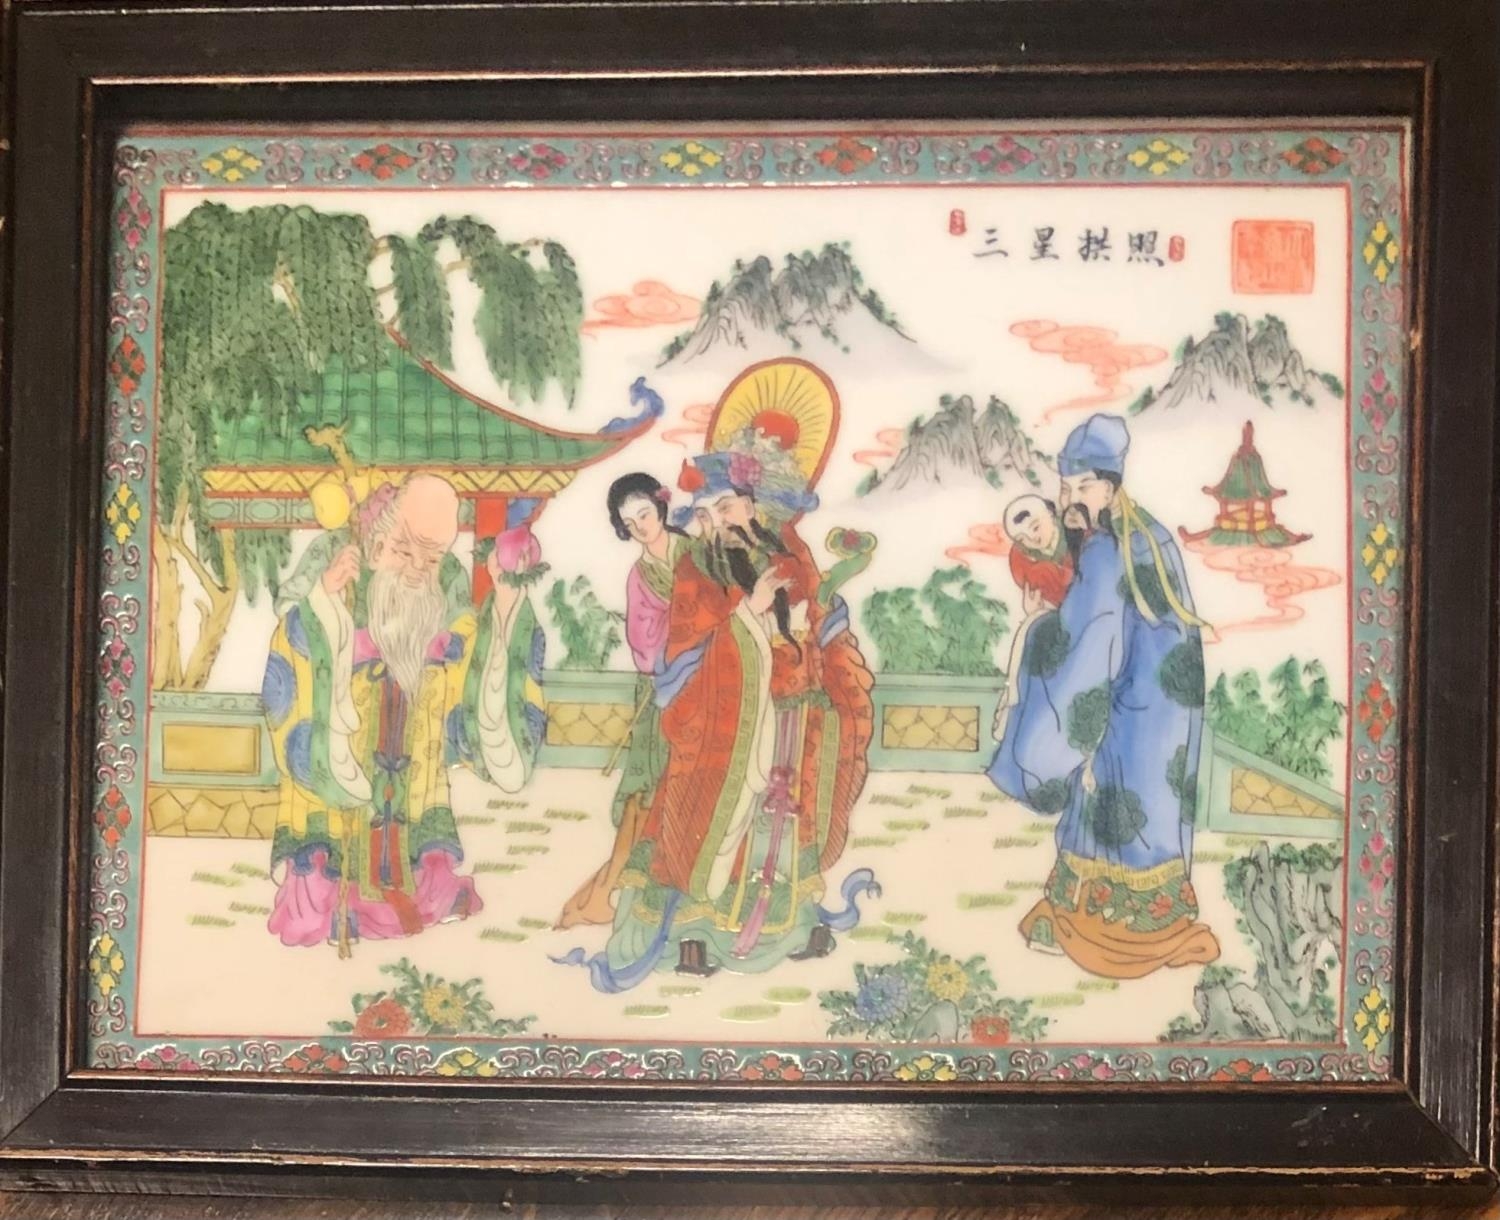 A CHINESE PORCELAIN PLAQUE Decorated with figures in a garden setting and script, framed. (33cm x